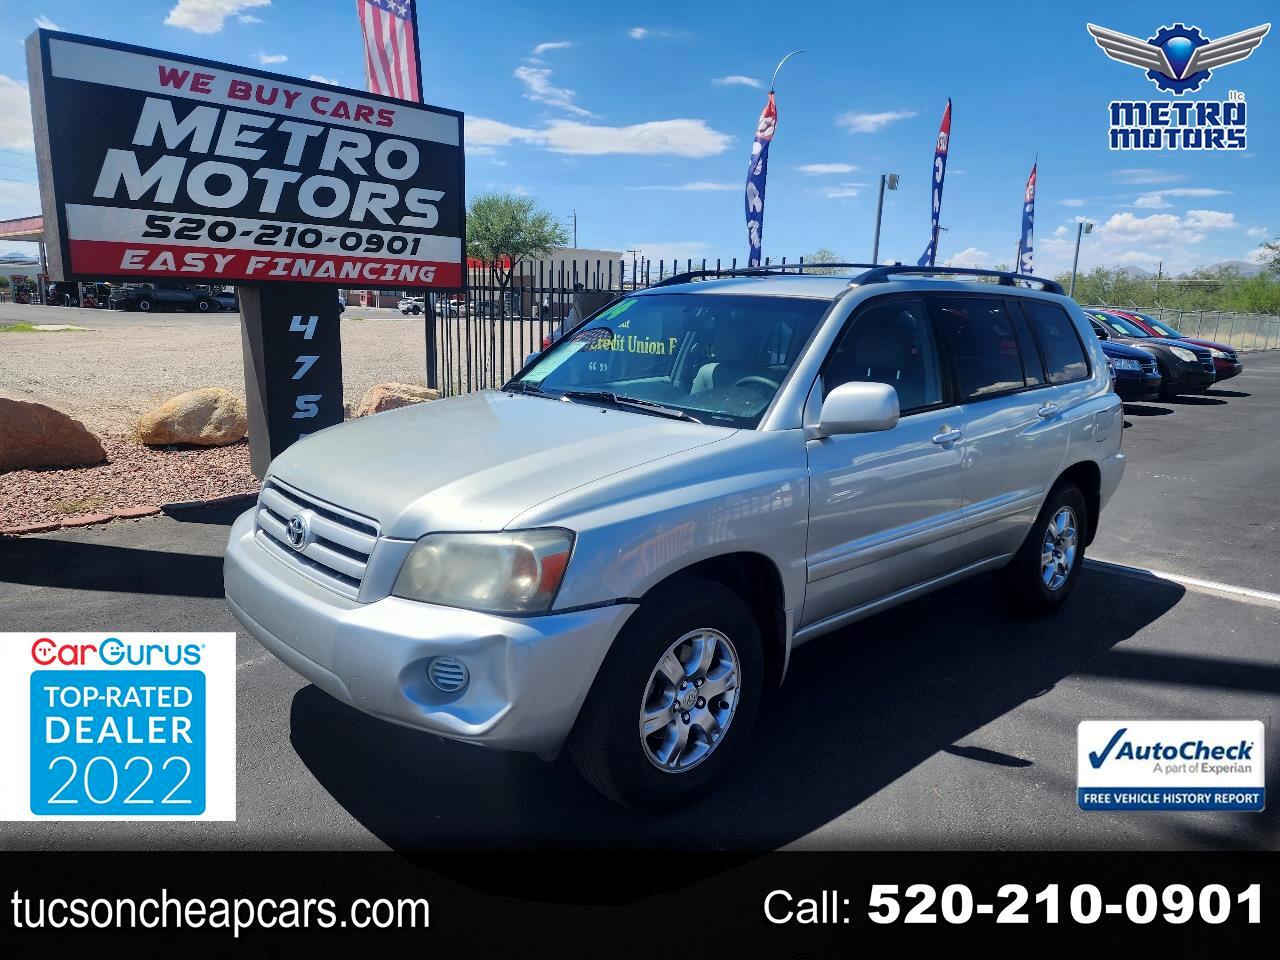 2004 Toyota Highlander V6 2WD with 3rd-Row Seat